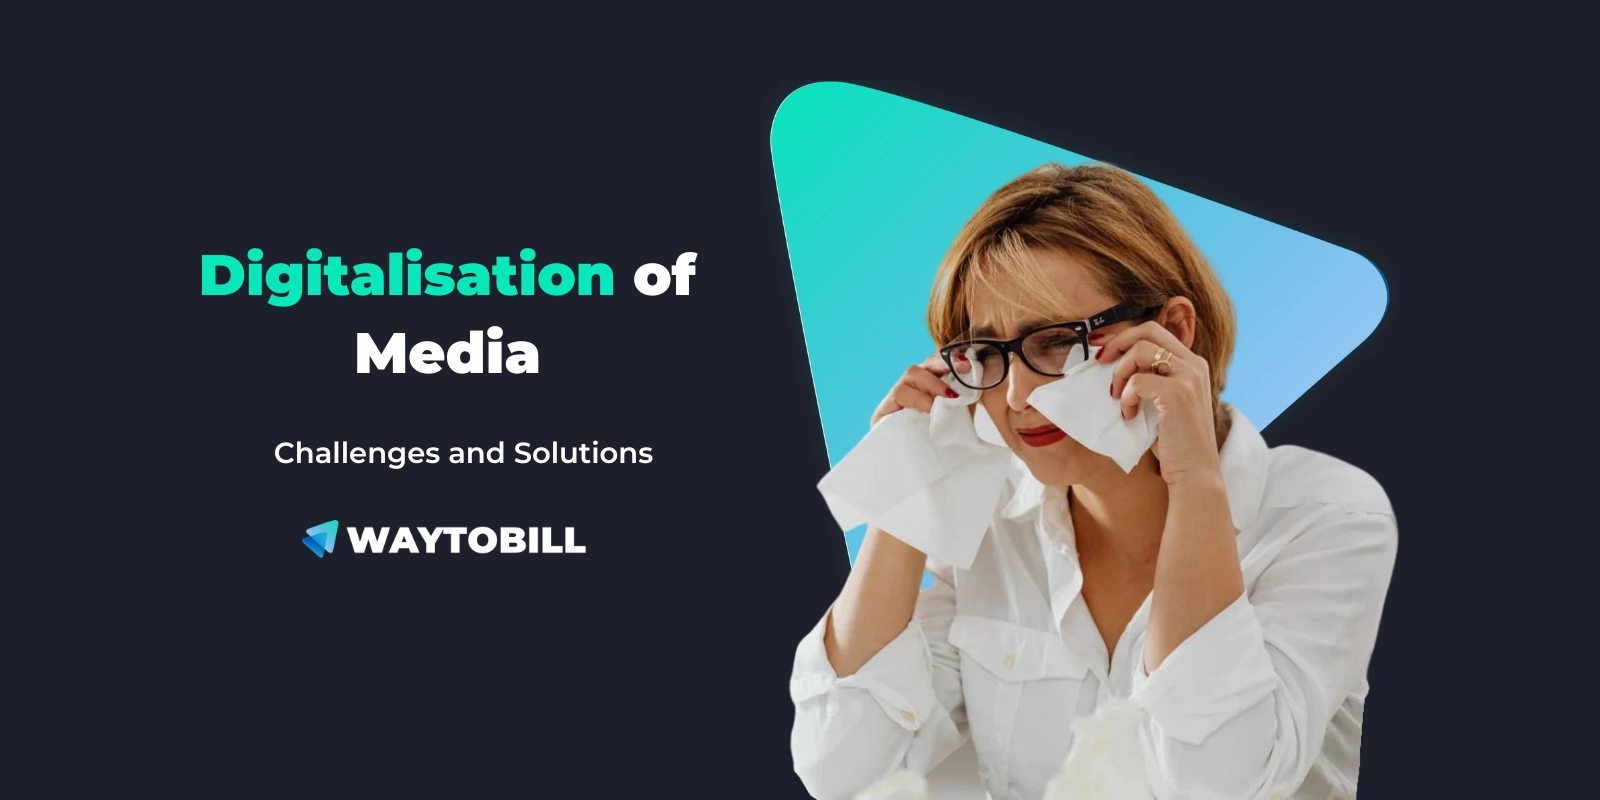 Media Digitalisation: Challenges and Solutions